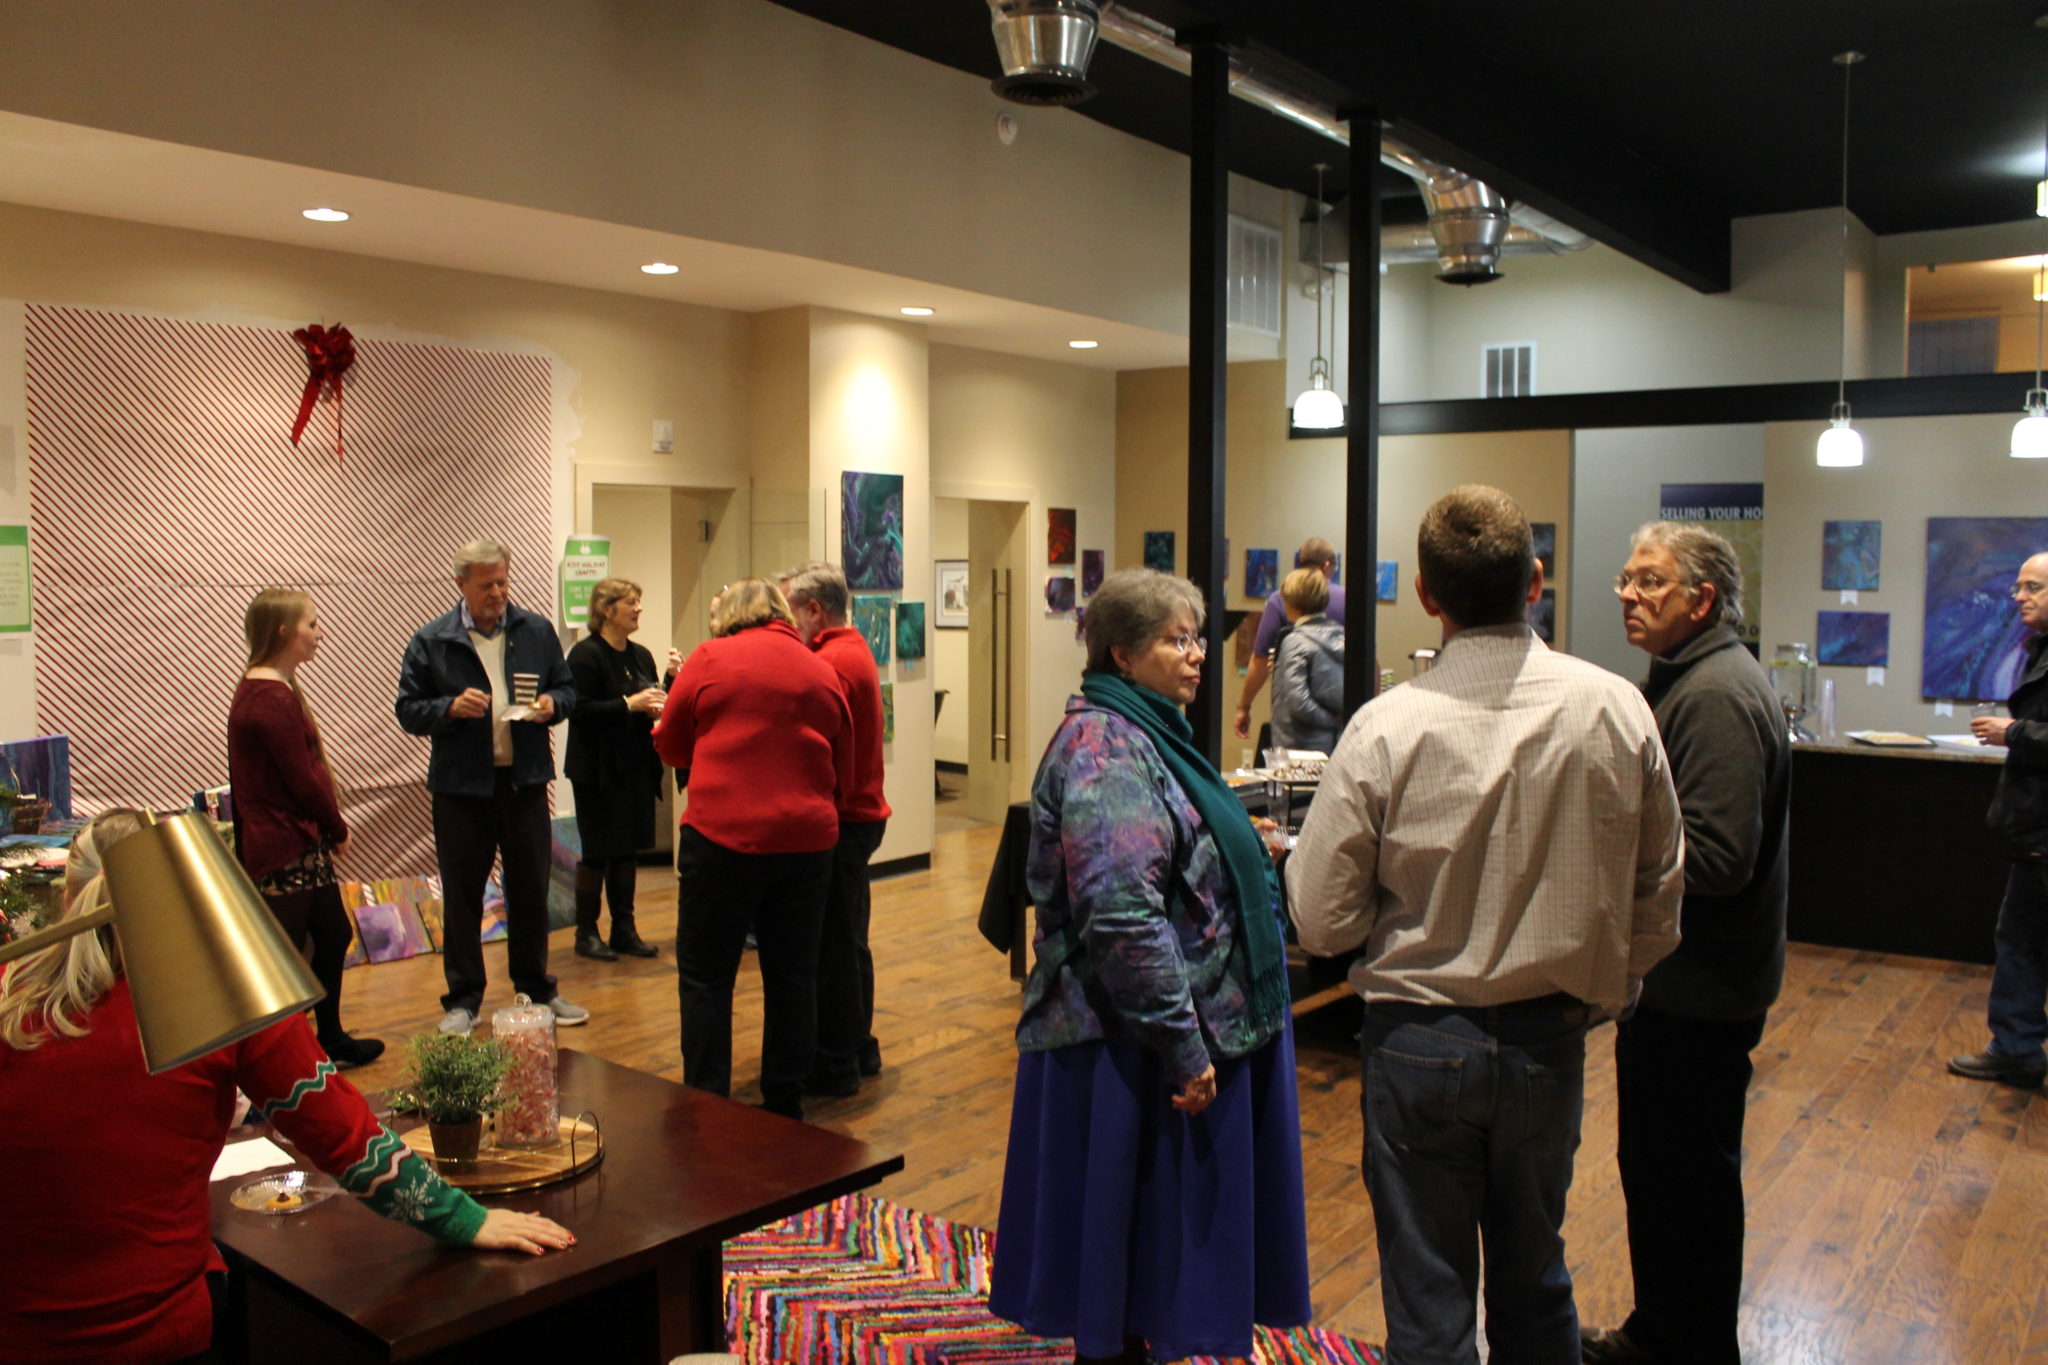 Holiday art museum event in Downtown Harrisonburg